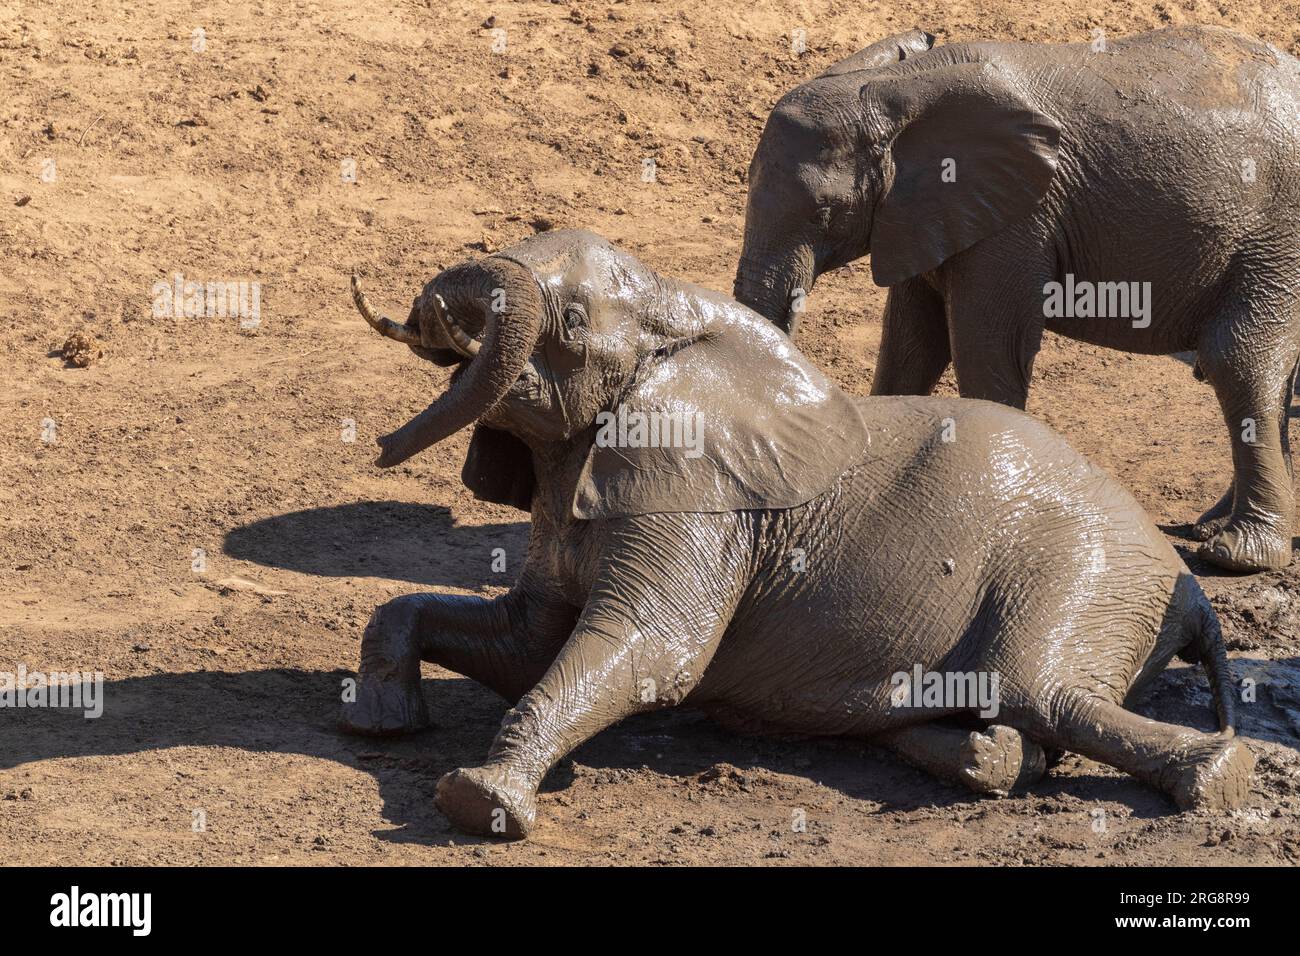 An elephant calf wallowing in a mud bath in the sunshine in the Kruger National Park, South Africa Stock Photo